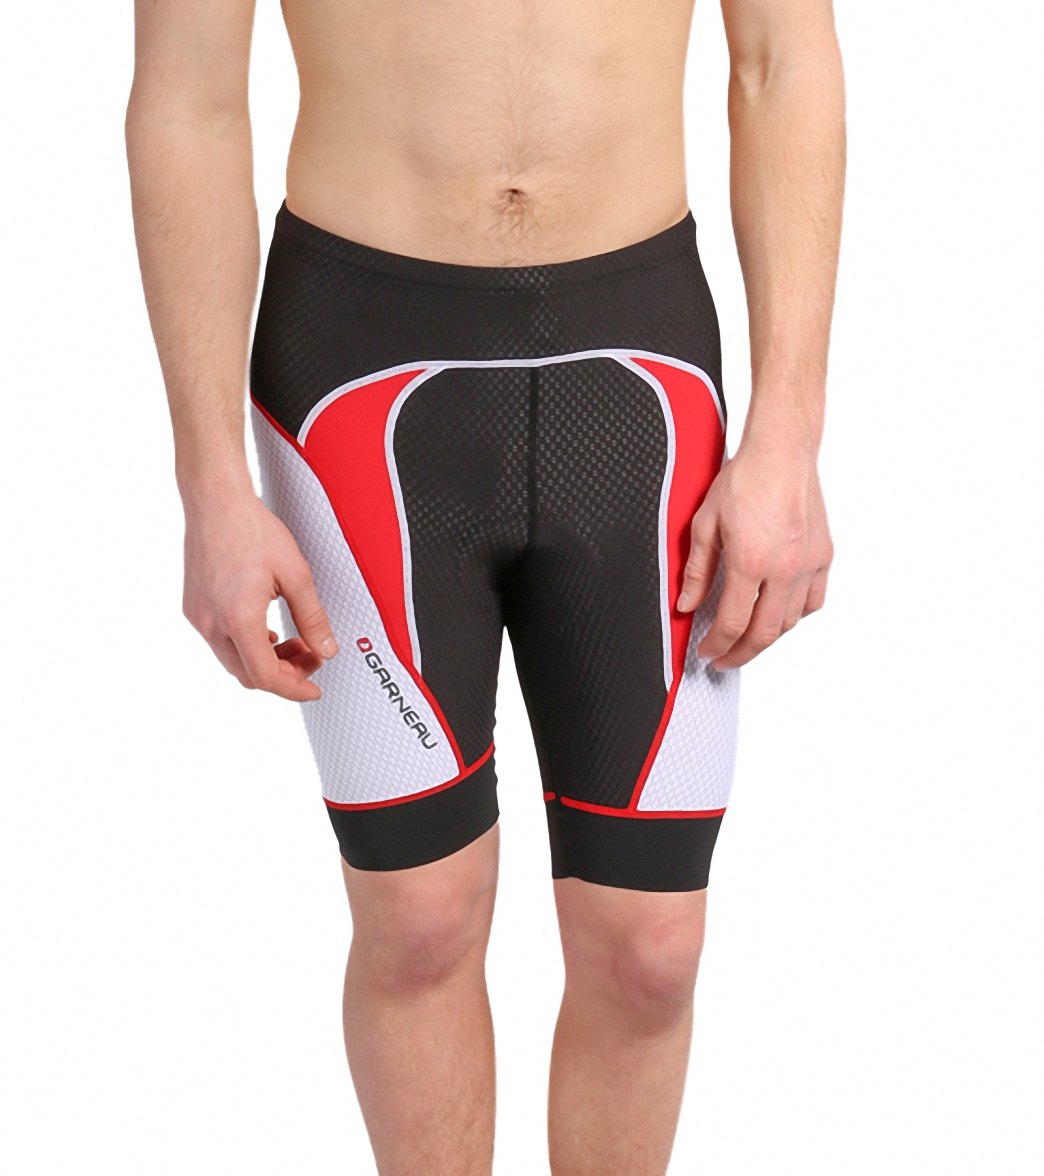 Men's Cycling Tights & Knickers